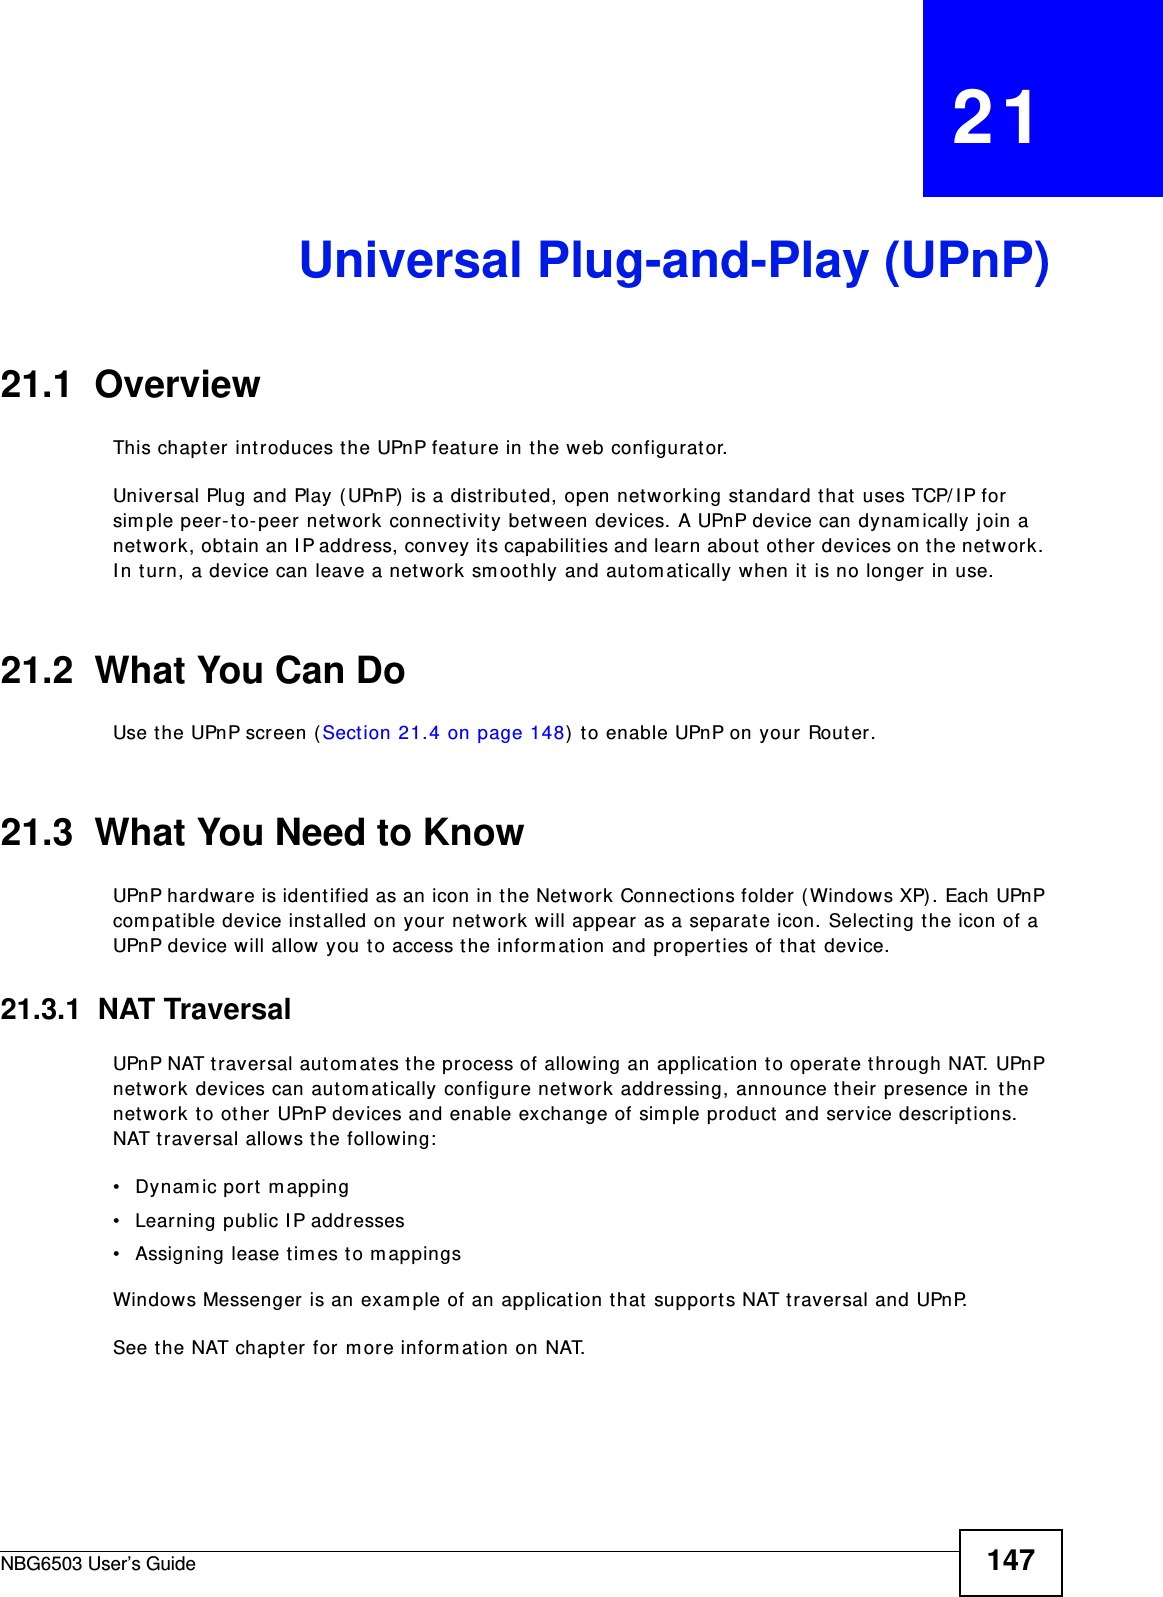 NBG6503 User’s Guide 147CHAPTER   21Universal Plug-and-Play (UPnP)21.1  Overview This chapter introduces the UPnP feature in the web configurator.Universal Plug and Play (UPnP) is a distributed, open networking standard that uses TCP/IP for simple peer-to-peer network connectivity between devices. A UPnP device can dynamically join a network, obtain an IP address, convey its capabilities and learn about other devices on the network. In turn, a device can leave a network smoothly and automatically when it is no longer in use.21.2  What You Can DoUse the UPnP screen (Section 21.4 on page 148) to enable UPnP on your Router.21.3  What You Need to KnowUPnP hardware is identified as an icon in the Network Connections folder (Windows XP). Each UPnP compatible device installed on your network will appear as a separate icon. Selecting the icon of a UPnP device will allow you to access the information and properties of that device. 21.3.1  NAT TraversalUPnP NAT traversal automates the process of allowing an application to operate through NAT. UPnP network devices can automatically configure network addressing, announce their presence in the network to other UPnP devices and enable exchange of simple product and service descriptions. NAT traversal allows the following:• Dynamic port mapping• Learning public IP addresses• Assigning lease times to mappingsWindows Messenger is an example of an application that supports NAT traversal and UPnP. See the NAT chapter for more information on NAT.